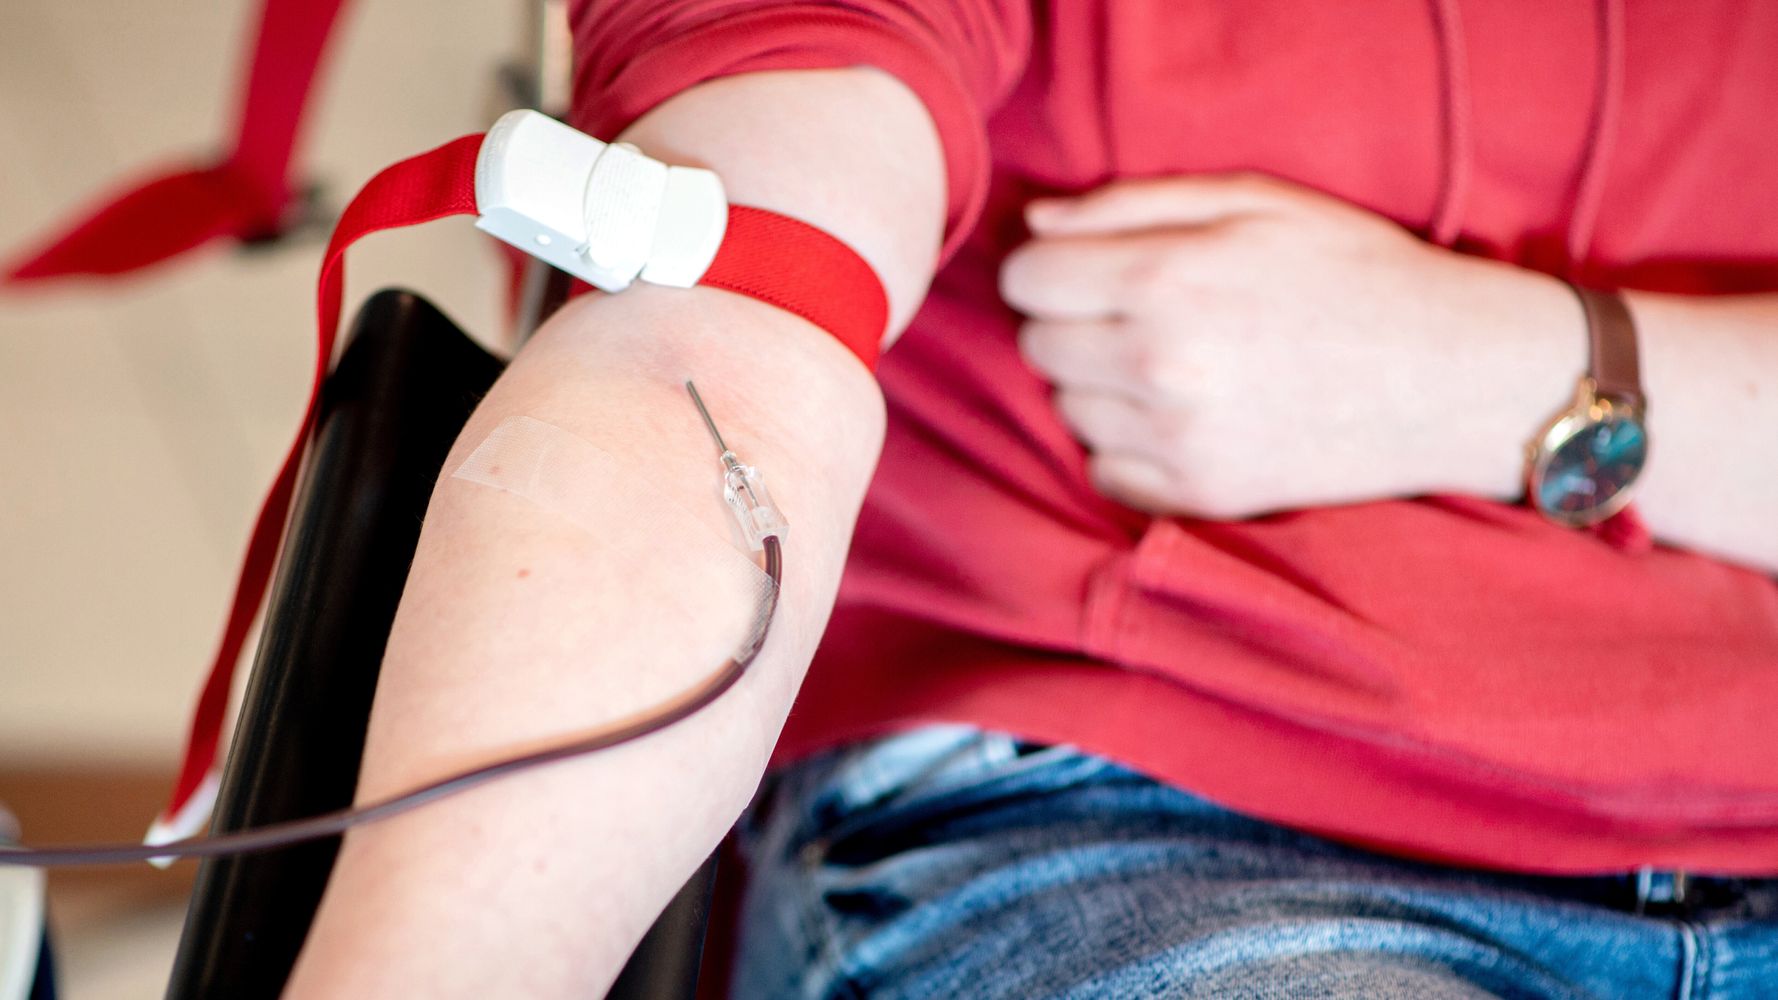 FDA Pressured to Ease Restrictions On Gay Men Donating Blood
Amid Shortage